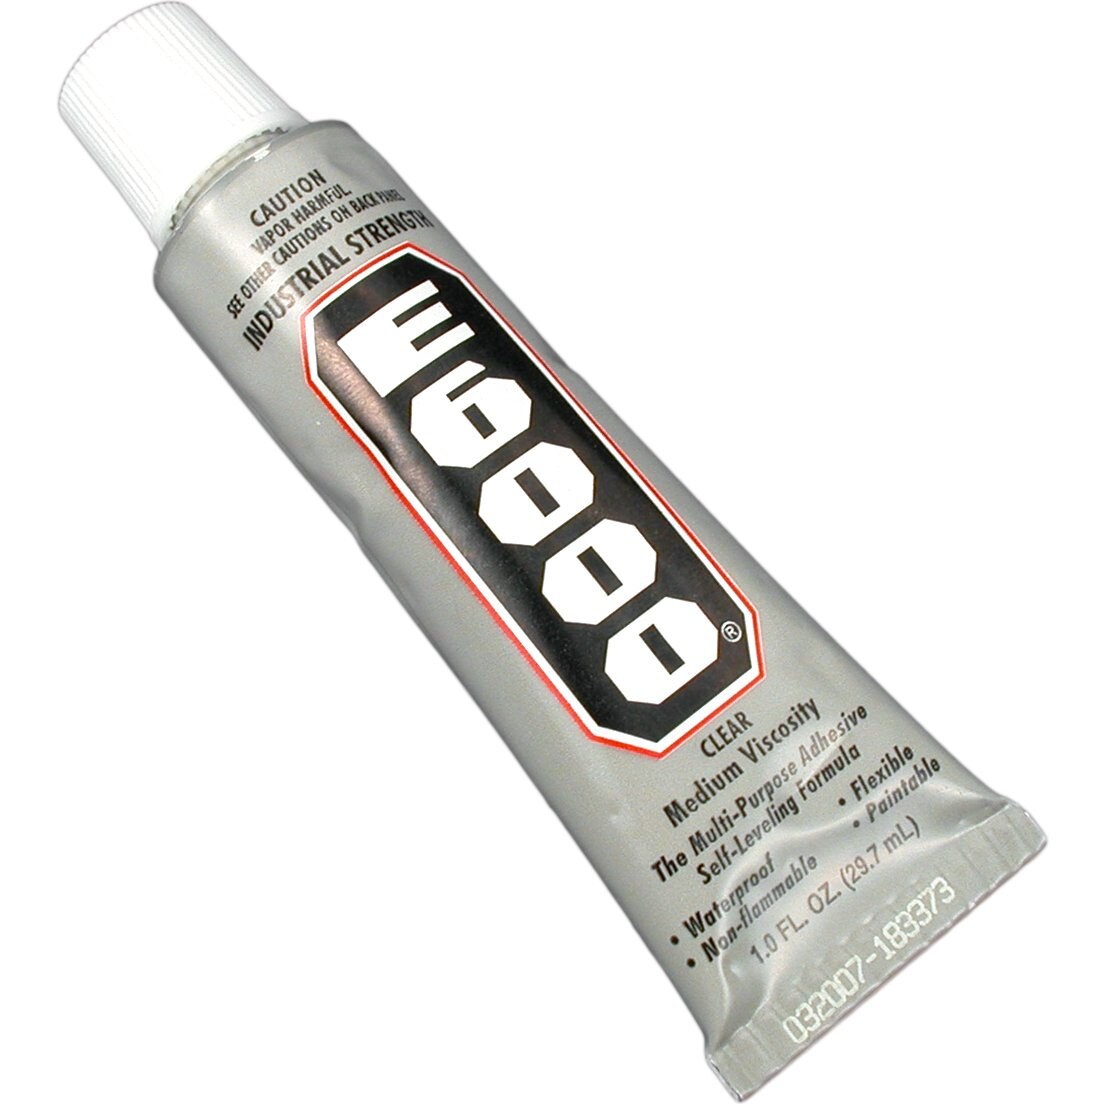 Eclectic E6000® Jewelry and Bead Glue: 1 ounce 